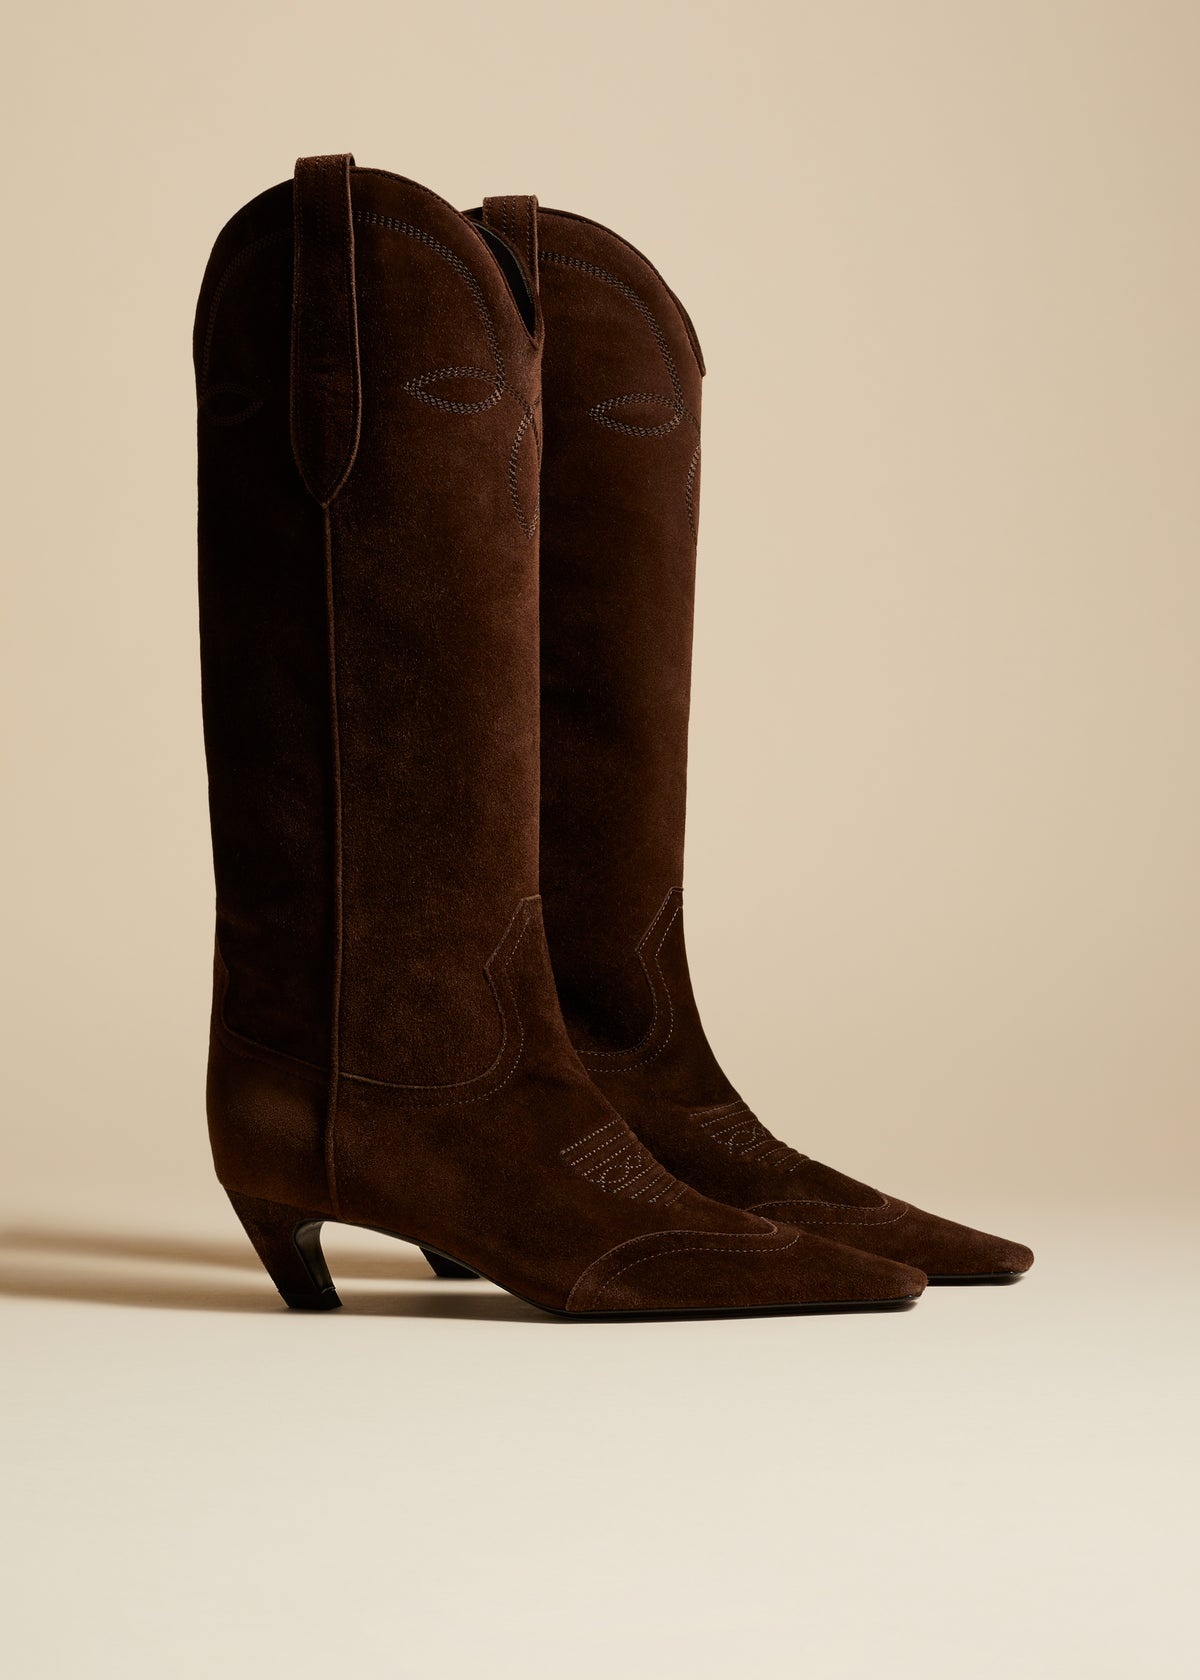 The Dallas Knee High Boot in Coffee Suede - 2